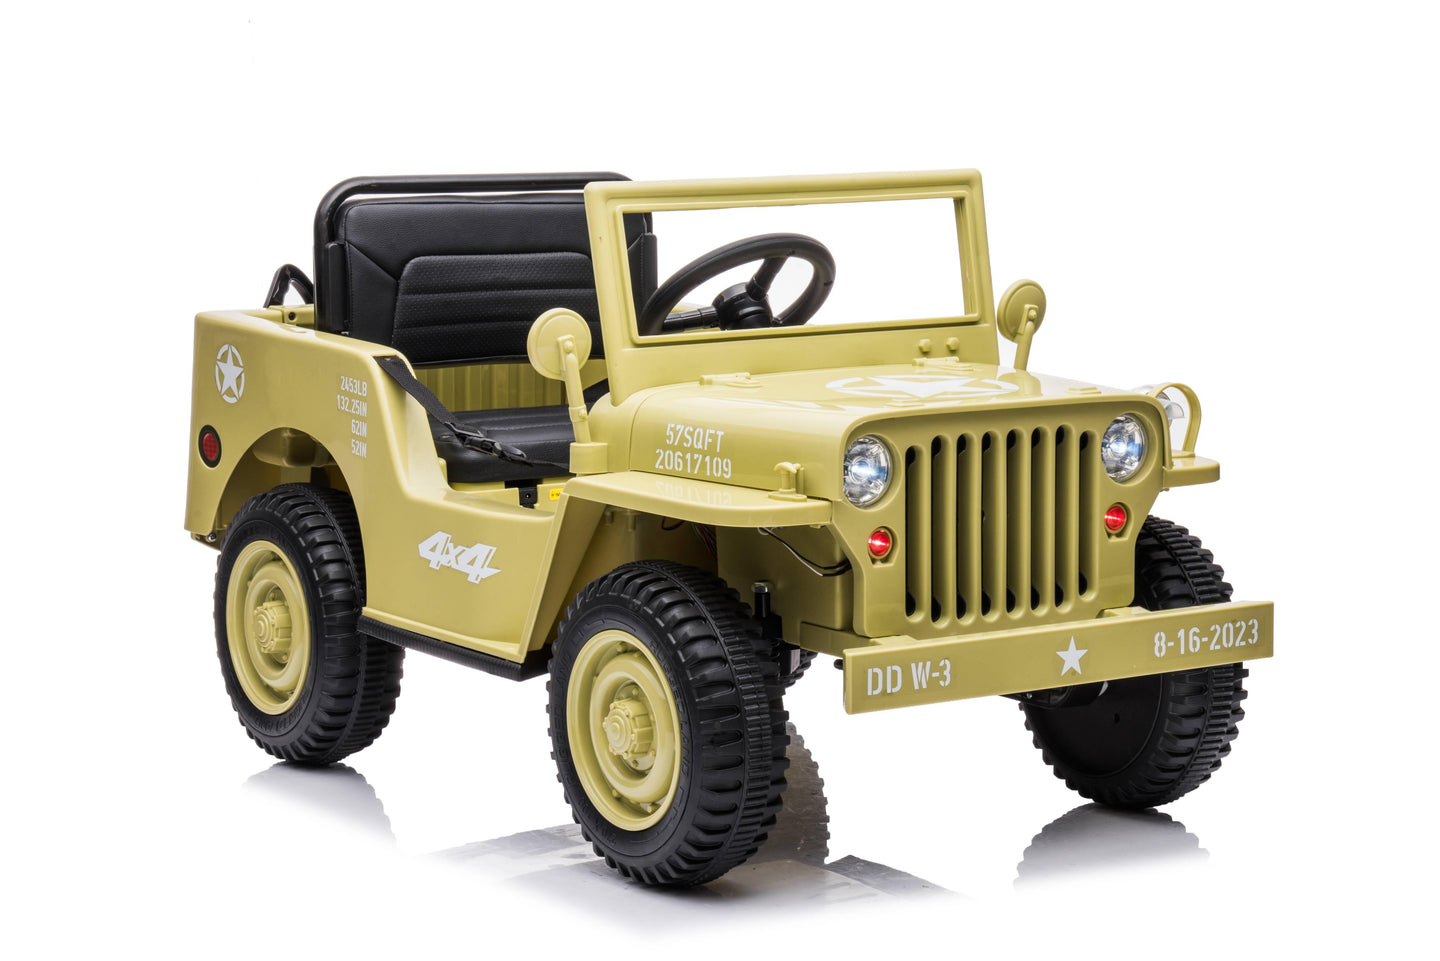 Buy 12V Military Jeep Electric Ride On Car For Kids - Green discounted | Products On Sale Australia